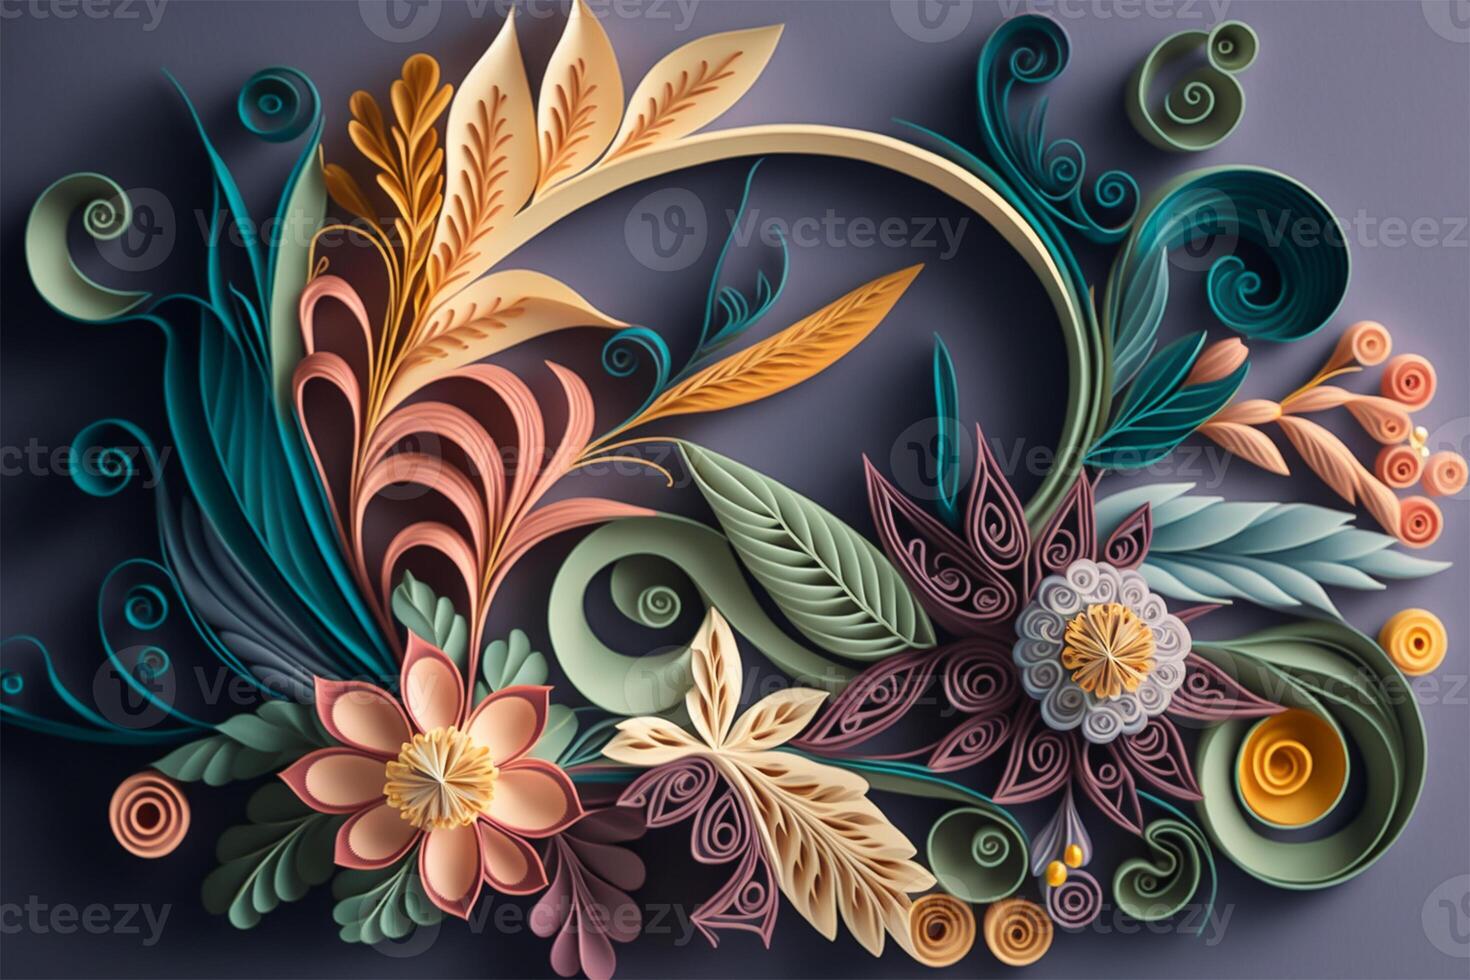 Flower bouquet arrangement in paper quilling style isolated on dark background. Beautiful decorative paperwork ornament. illustration. photo